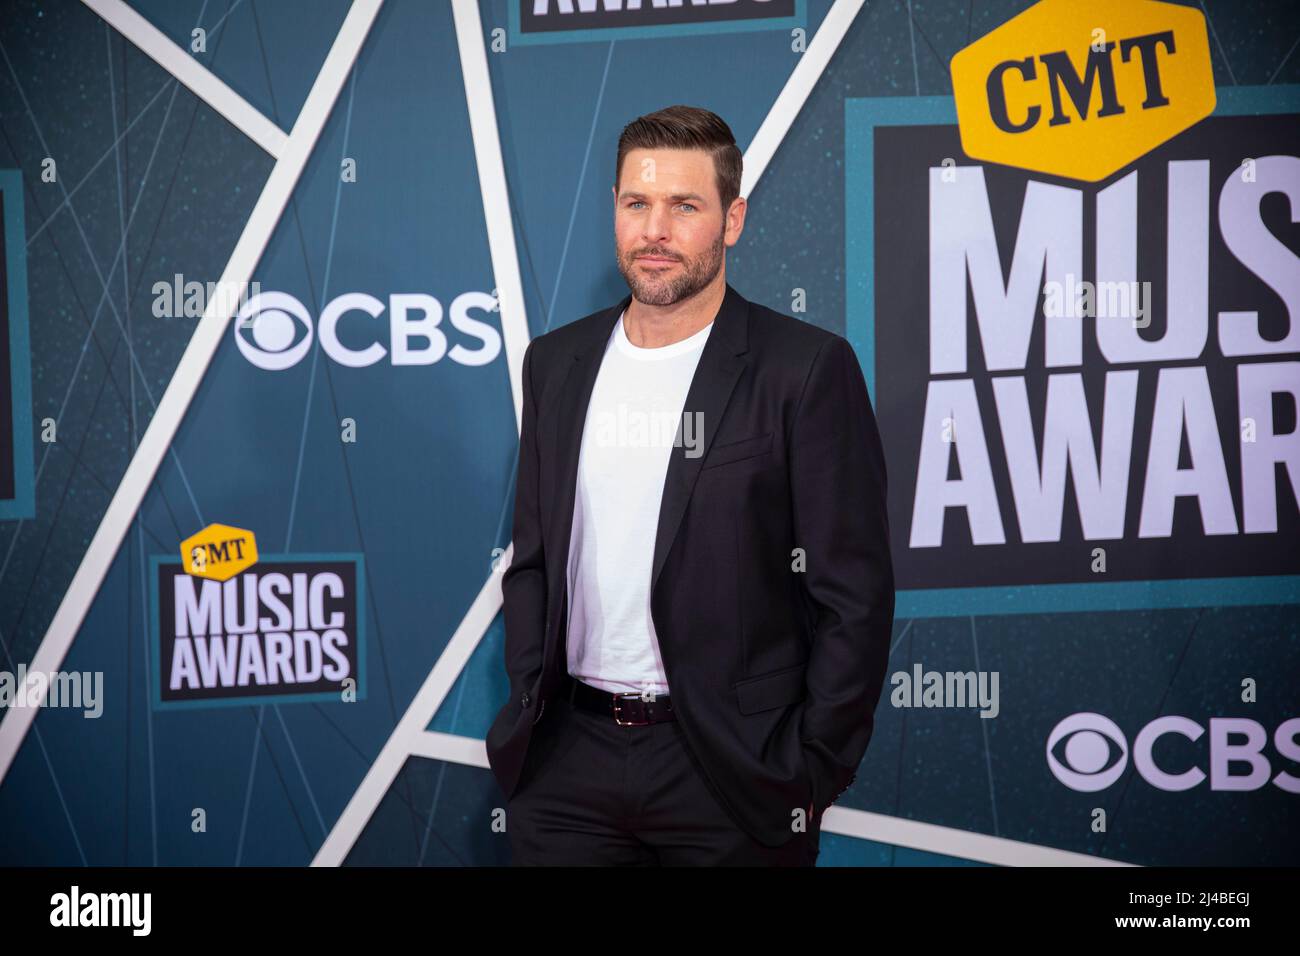 Nashville, Tenn. - April 11, 2022 Mike Fisher arrives at the red carpet for the 2022 CMT Awards on April 11, 2022 at Municipal Auditorium in Nashville, Tenn. Credit: Jamie Gilliam/The Photo Access Stock Photo